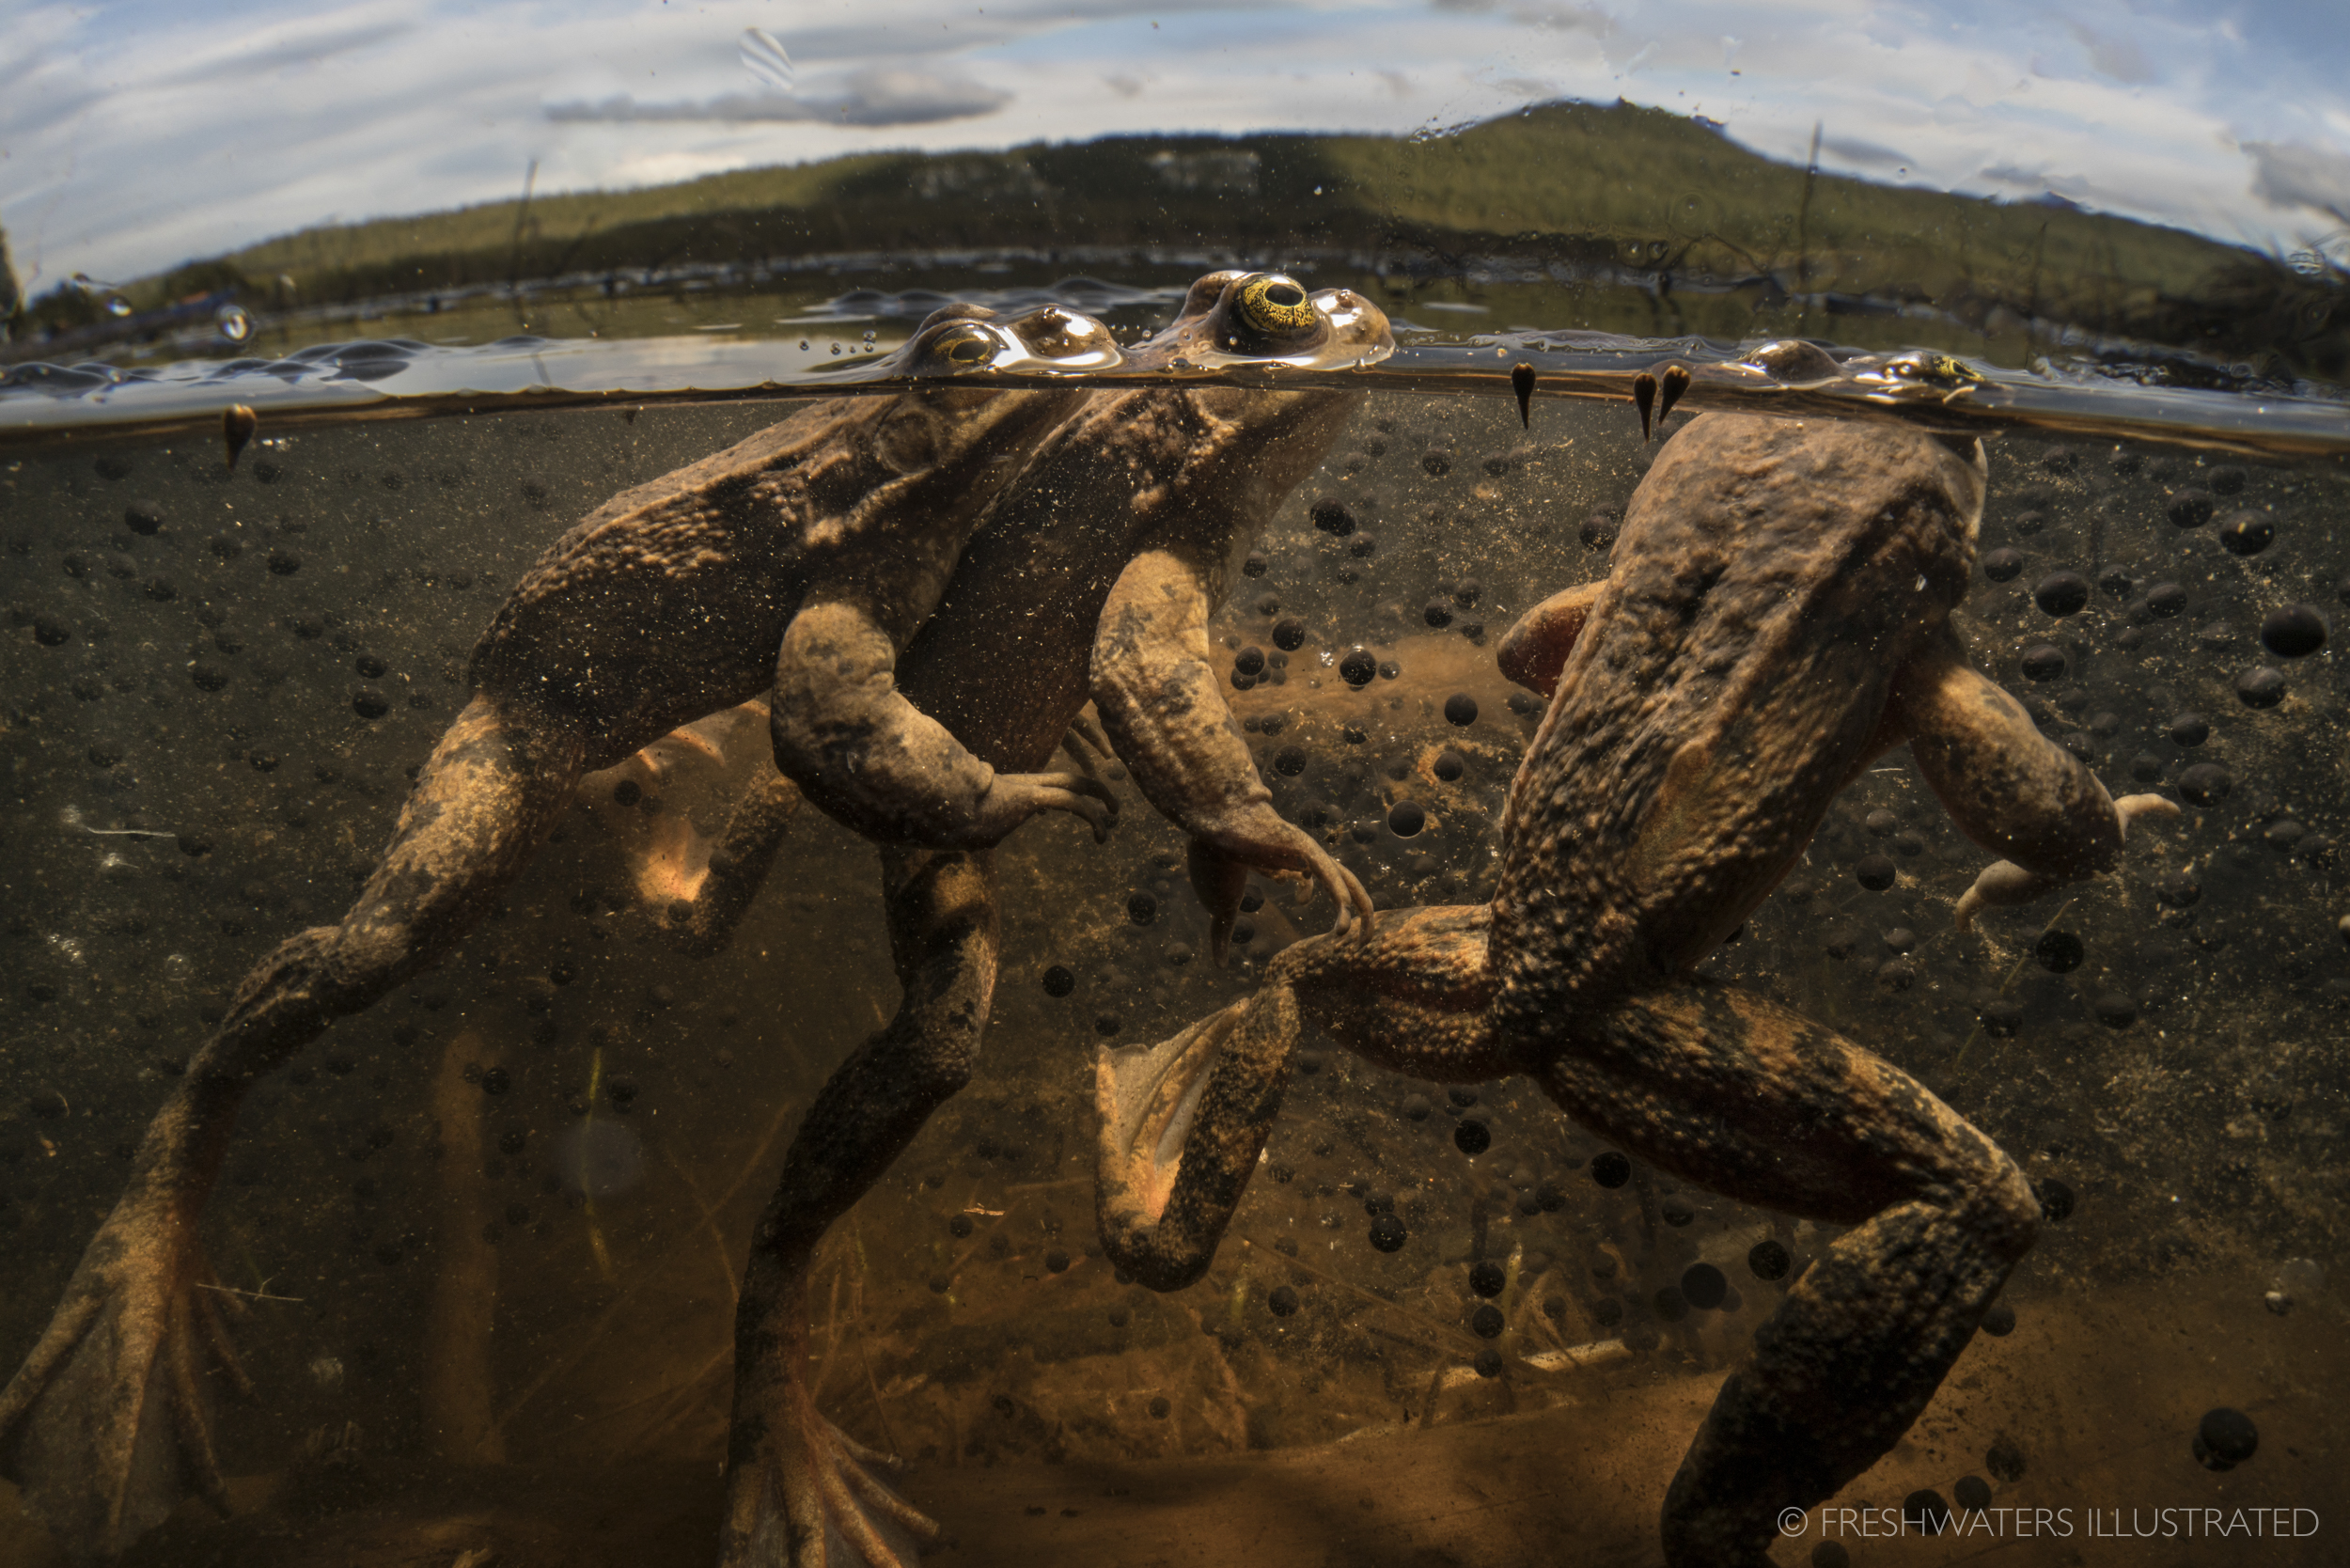  Scuffling for position amongst a giant mass of floating orbs, a group of male Oregon spotted frogs (Rana pretiosa) patiently await the arrival of egg filled females . With large congregations of females laying their eggs in the same area, giant mats